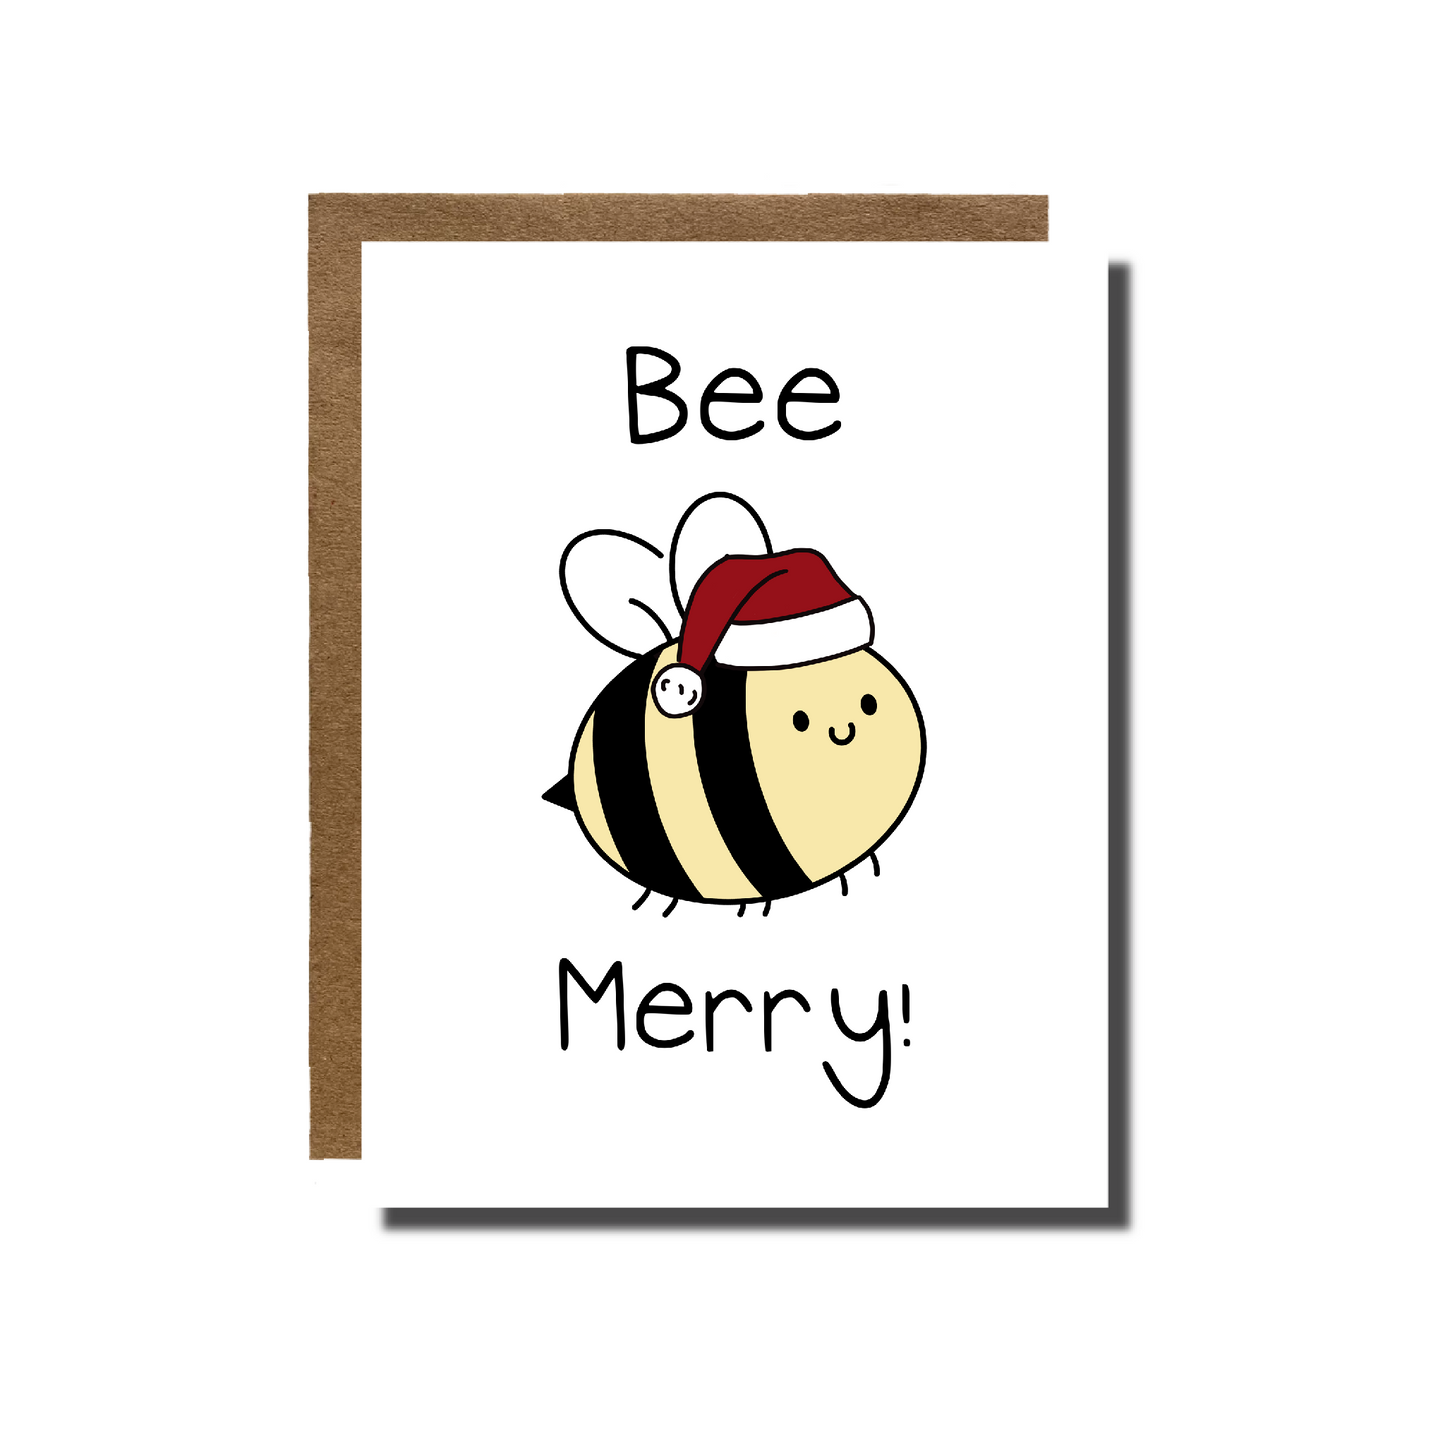 Bee Merry Greeting Card